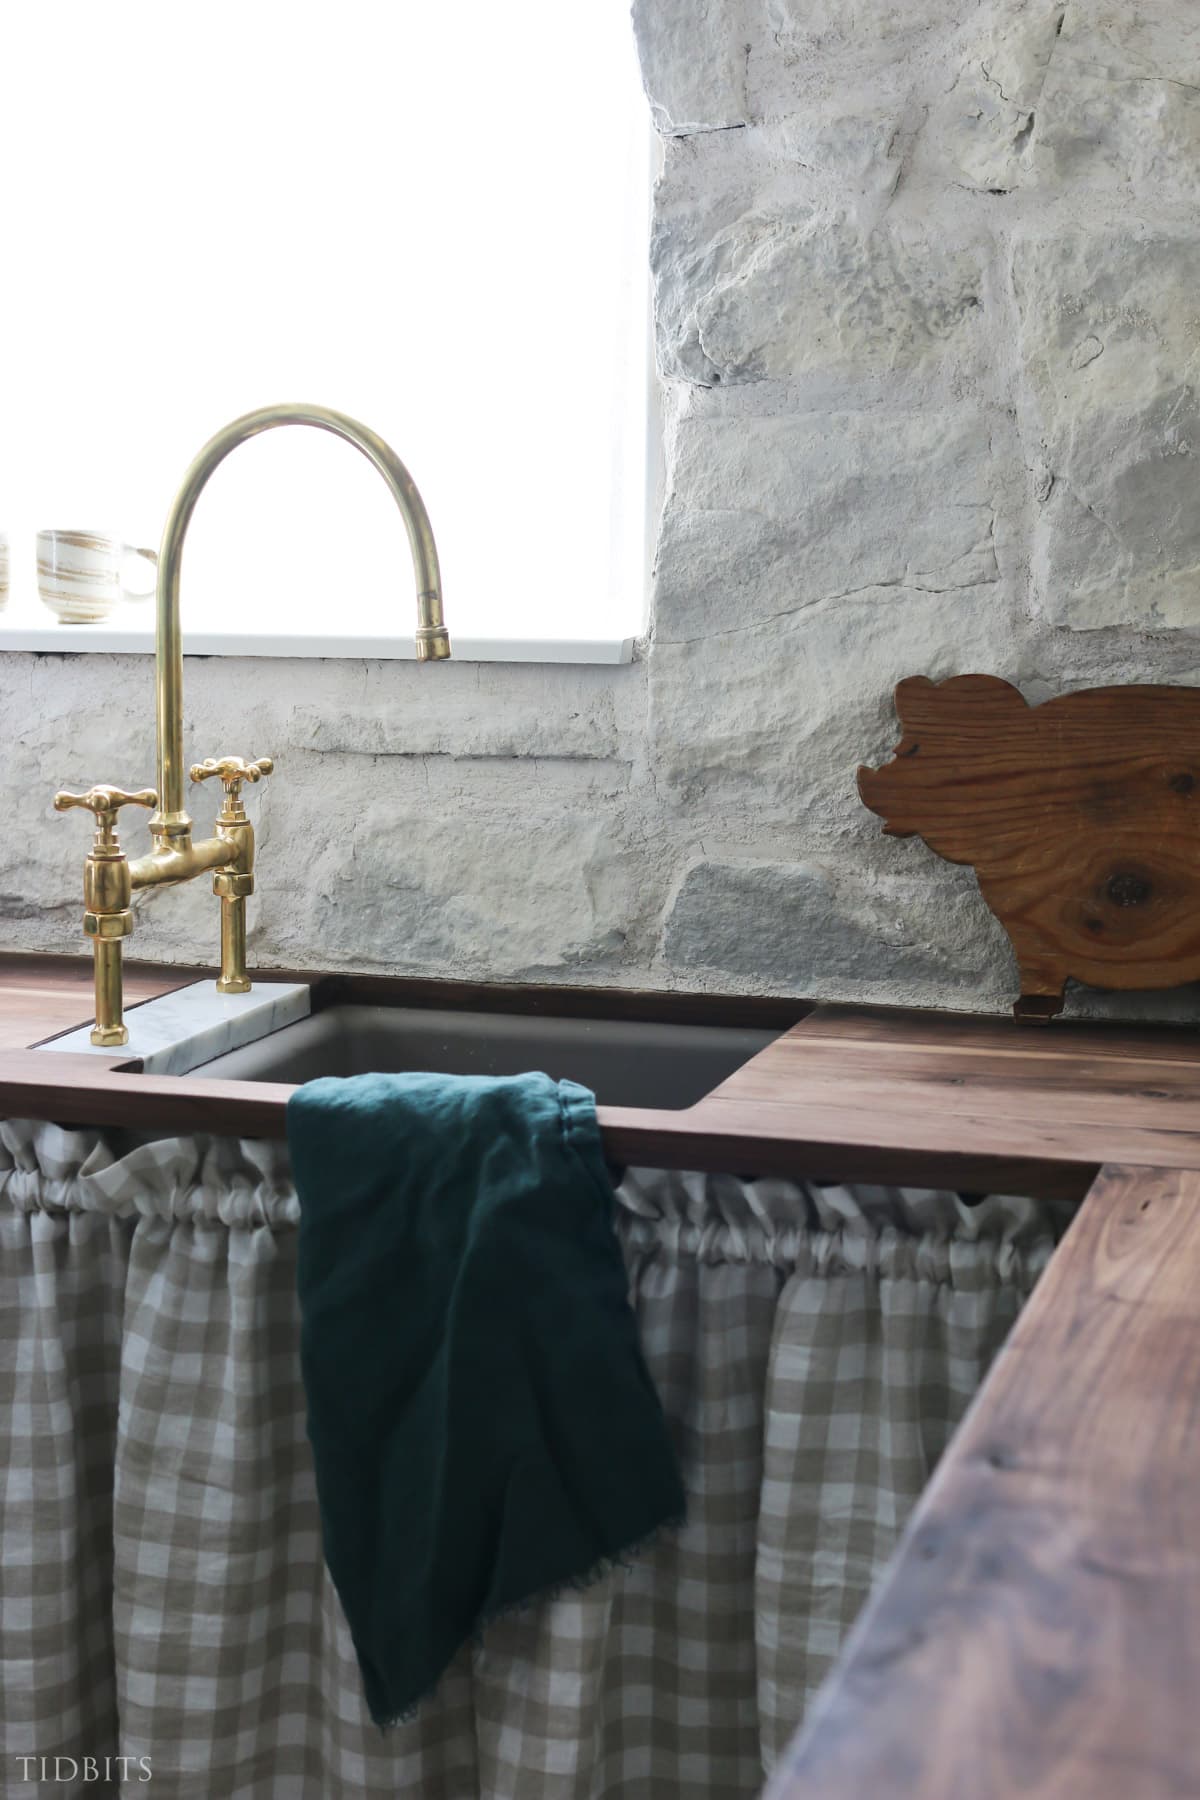 Brass faucet and butcher block counter top